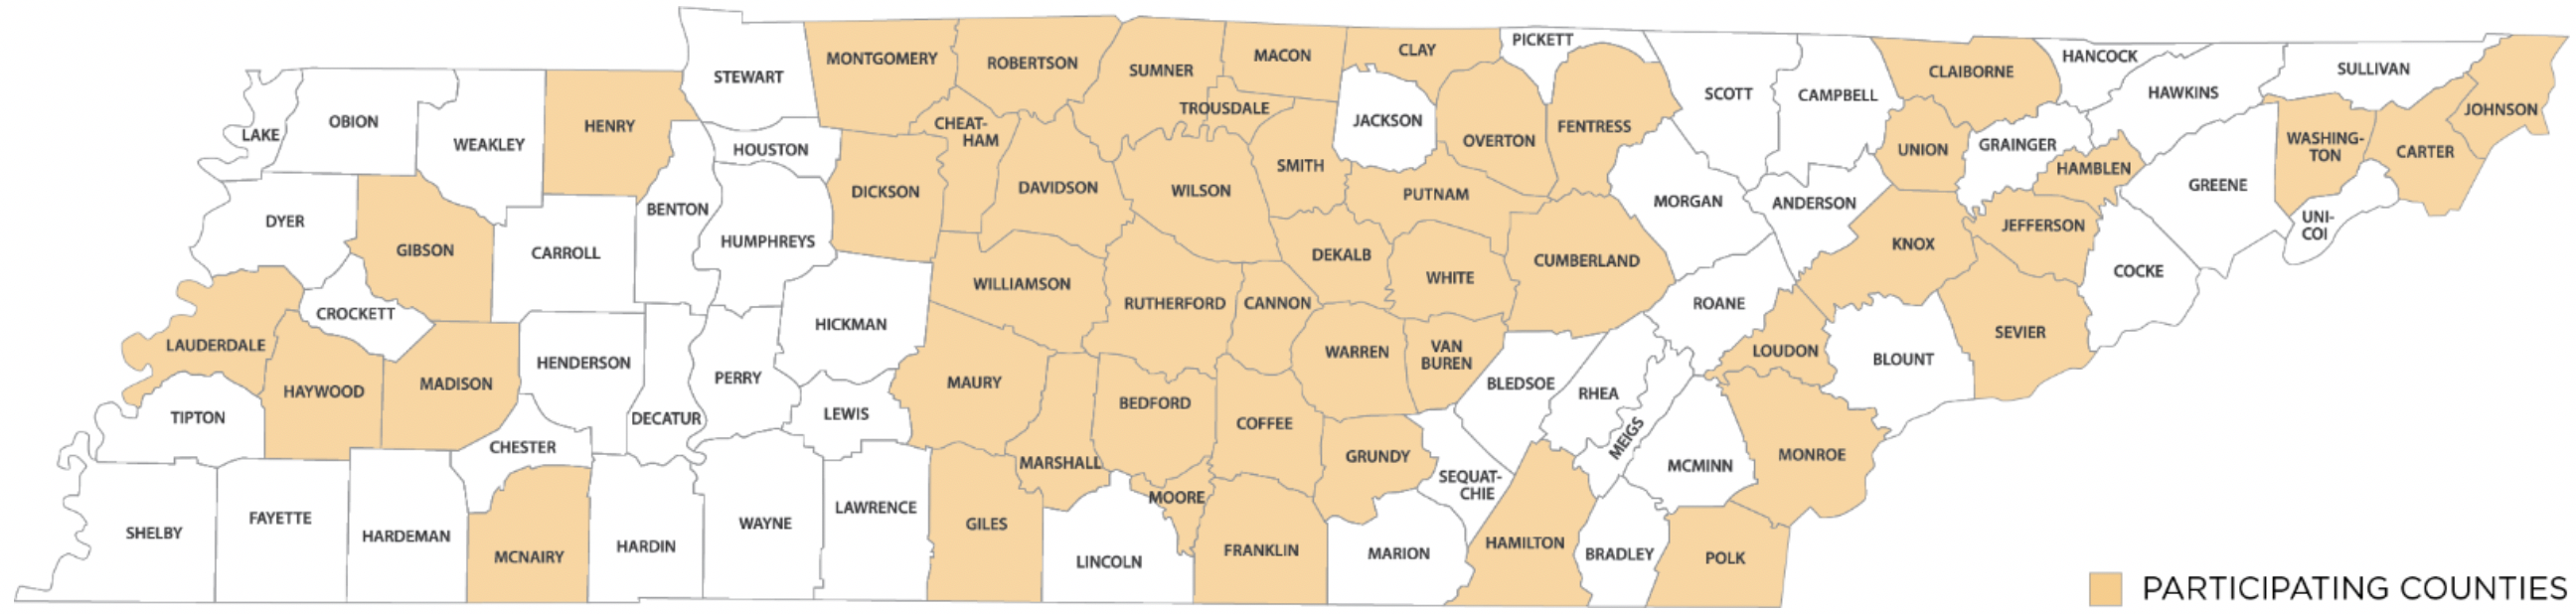 Map of participating counties in Tennessee